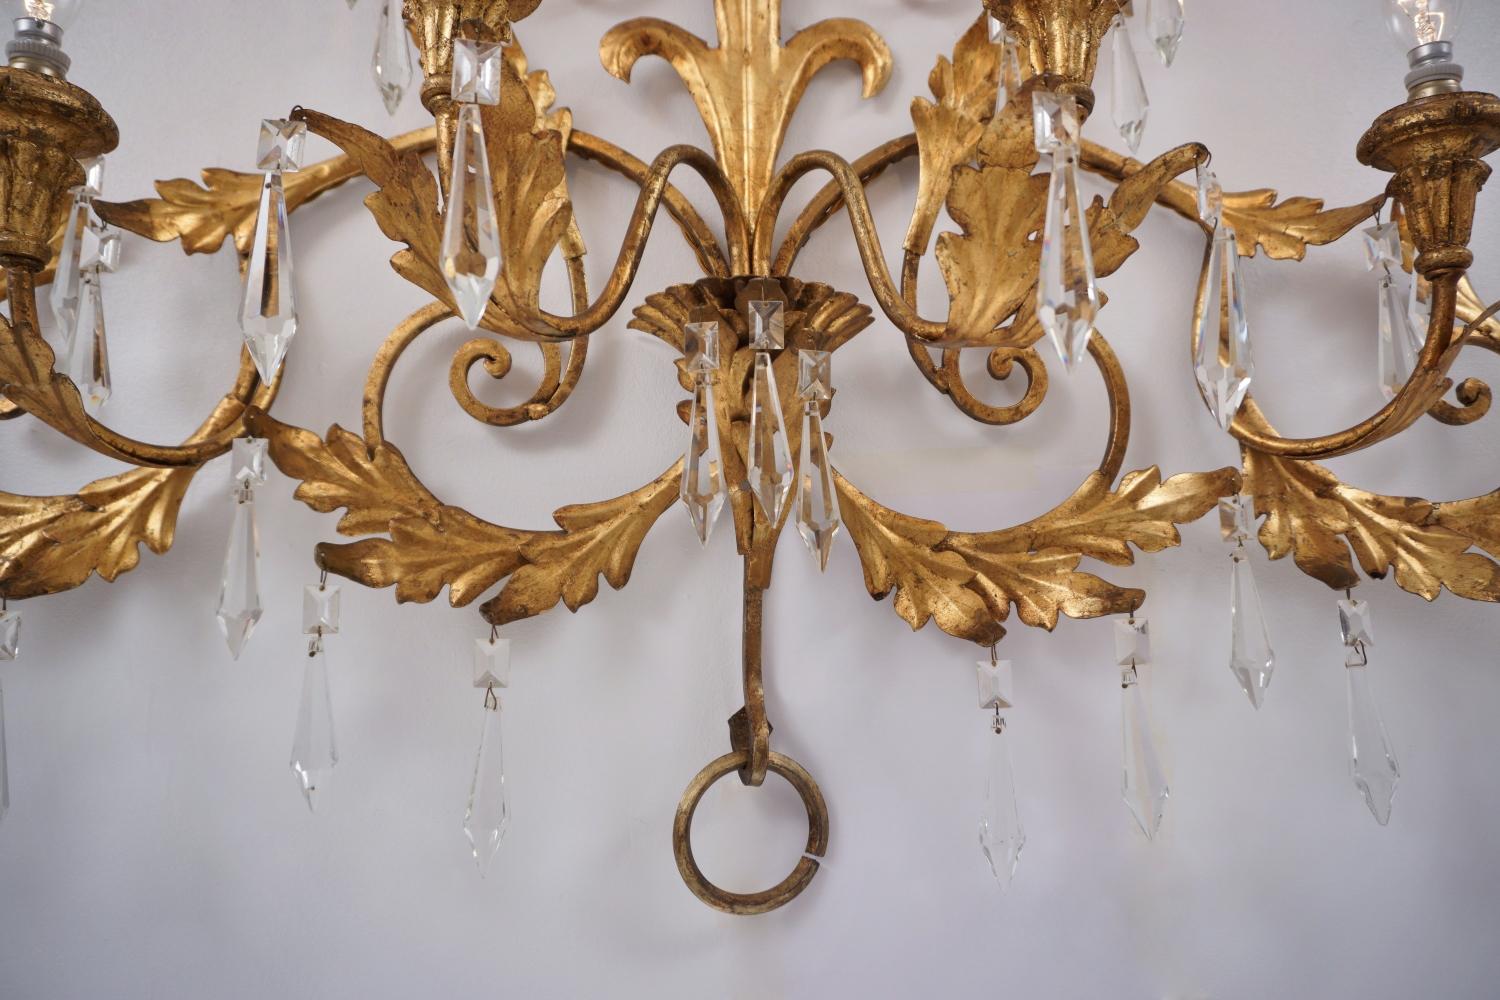 Mid-20th Century Gilt Tone Sconce, Large 120cm and 6 Lights with Crystals, circa 1950s, Italian For Sale